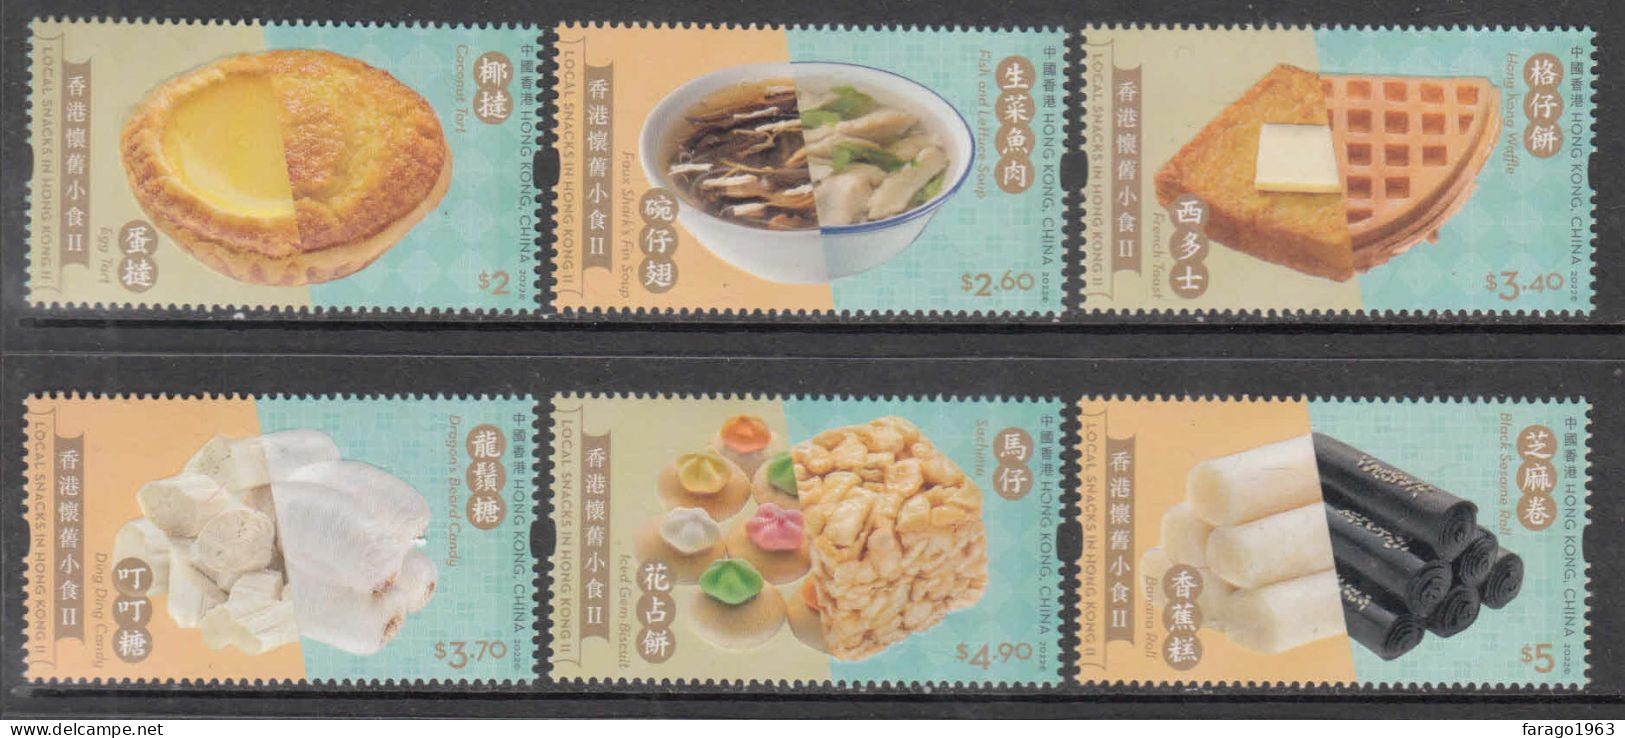 2022 Hong Kong Local Snacks Gastronomie  Complete Set Of 6 MNH @  FACE VALUE - Neufs